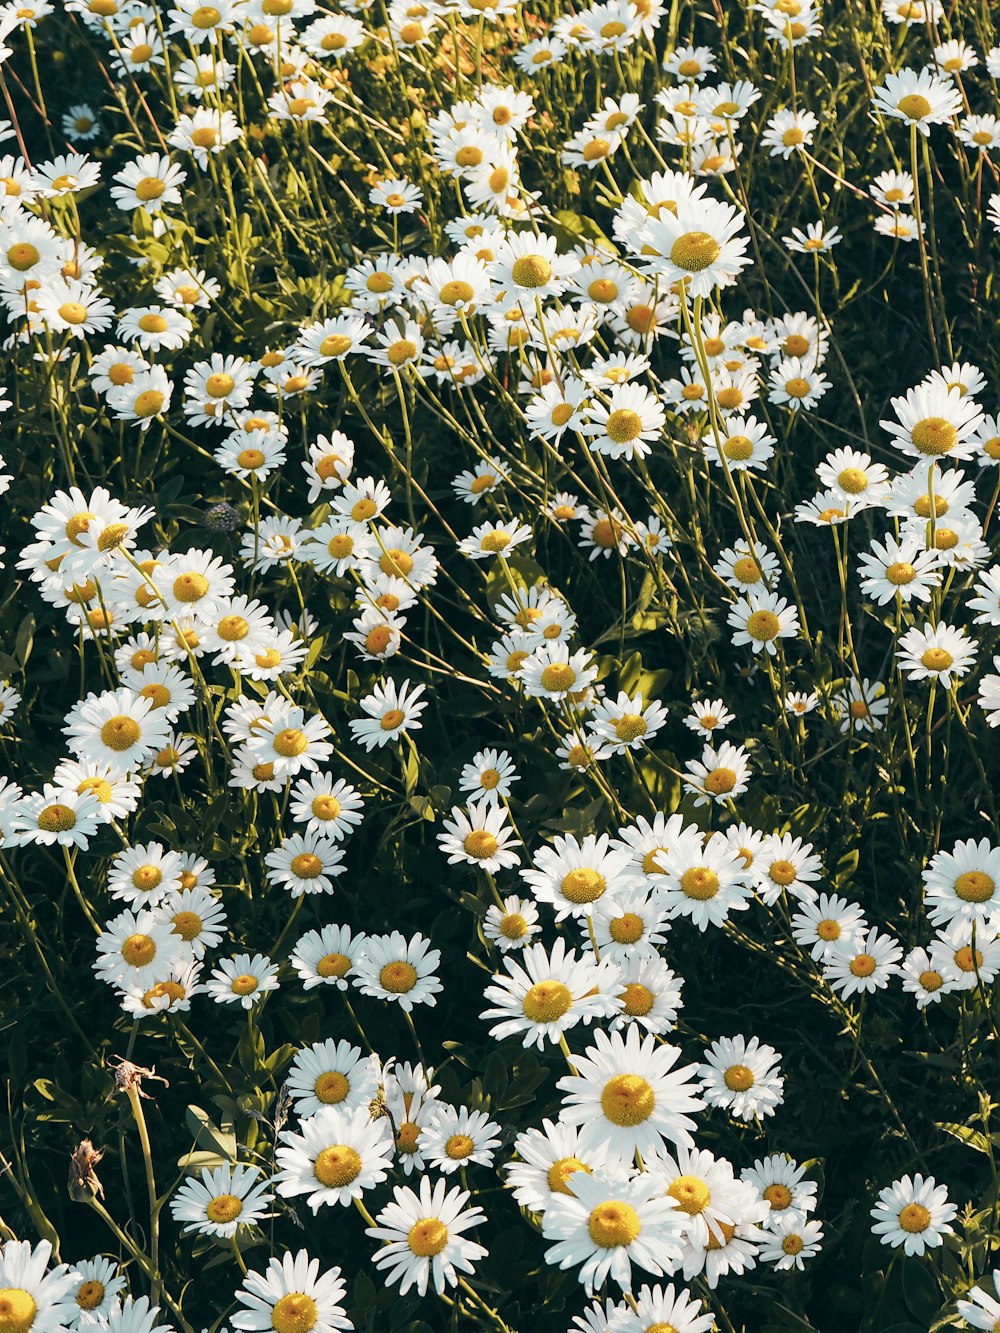 a field full of white daisies in the sun